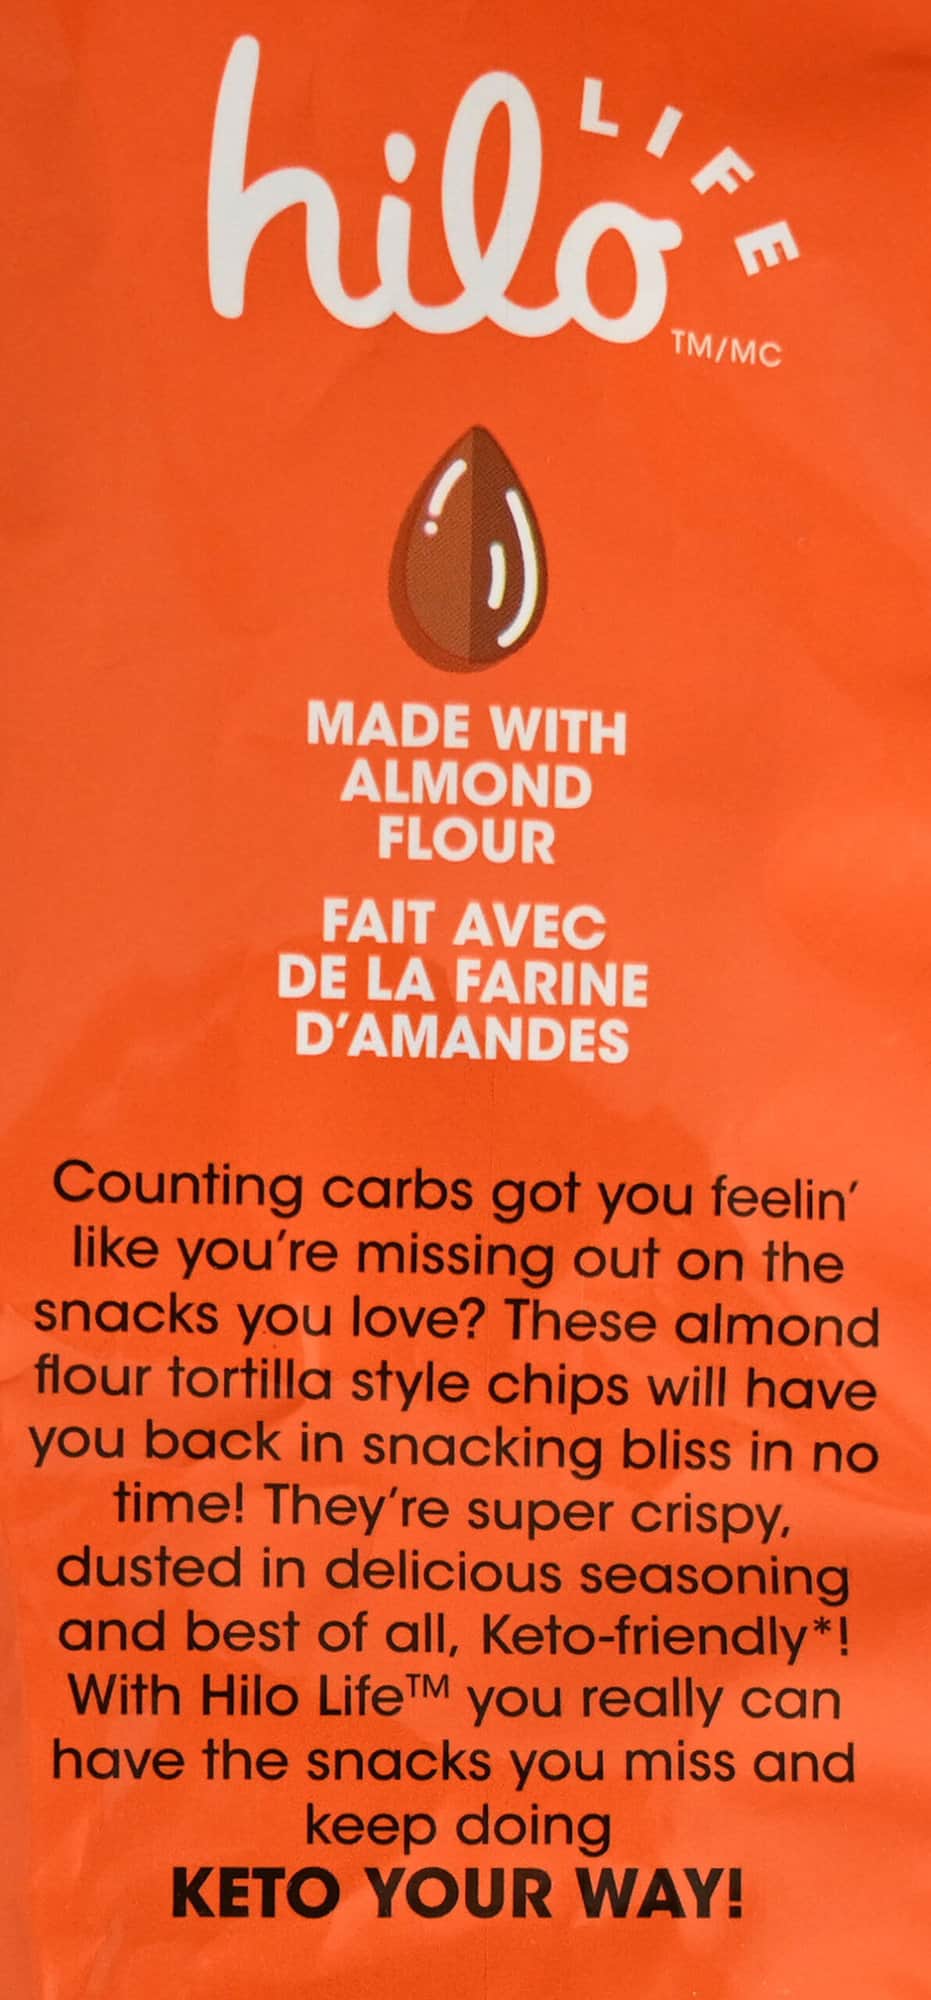 Image of the product description from the bag. Description states the chips 